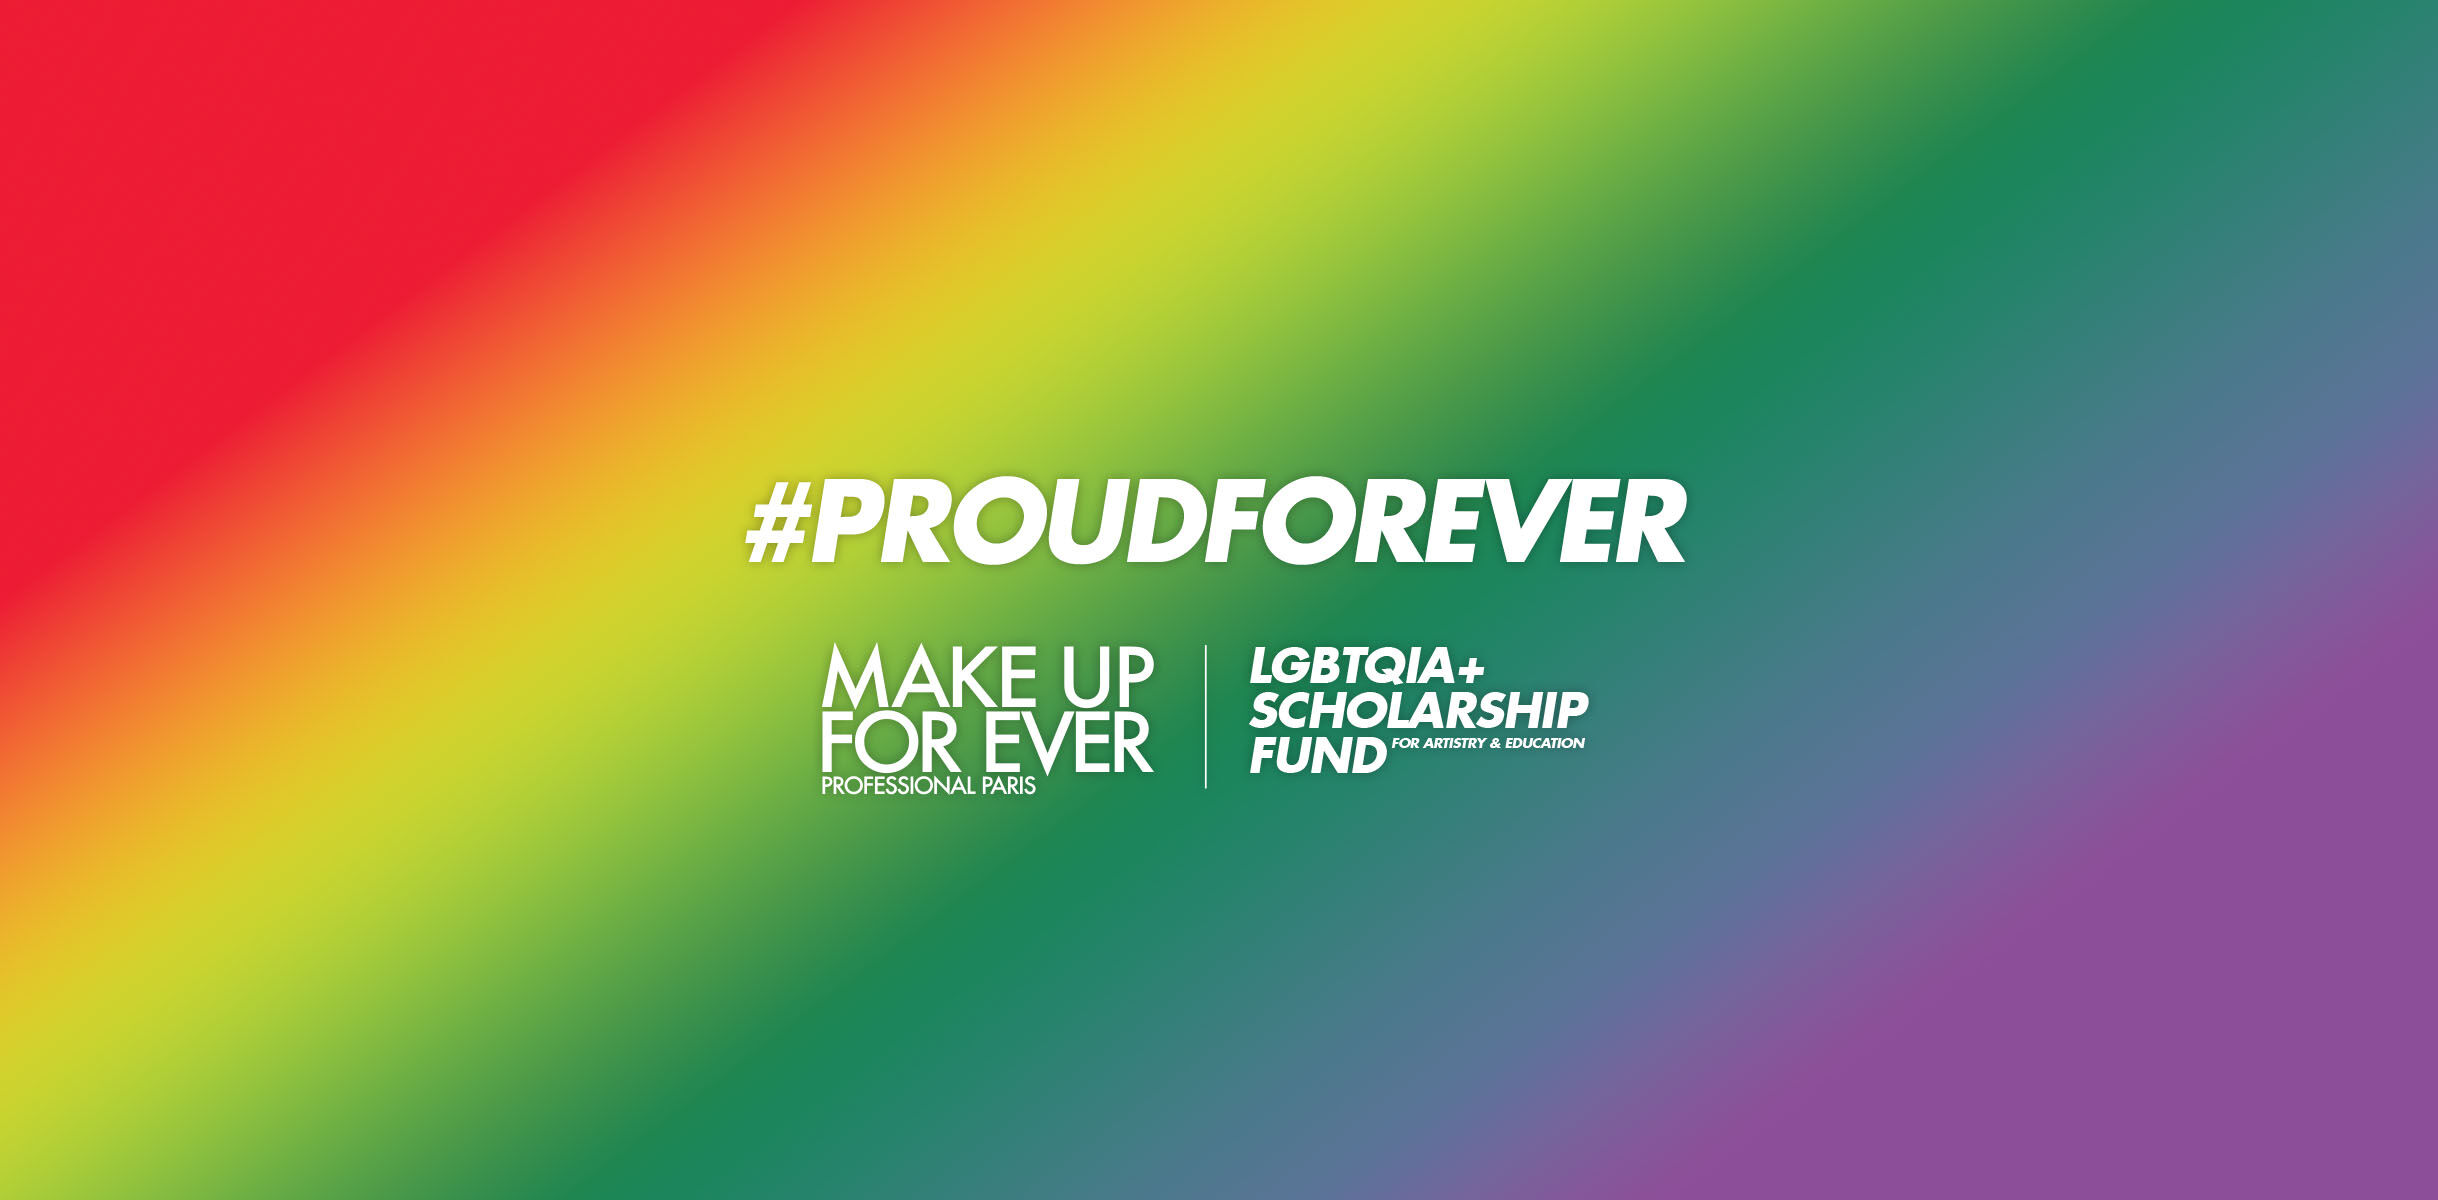 #PROUDFOREVER Make Up For Ever